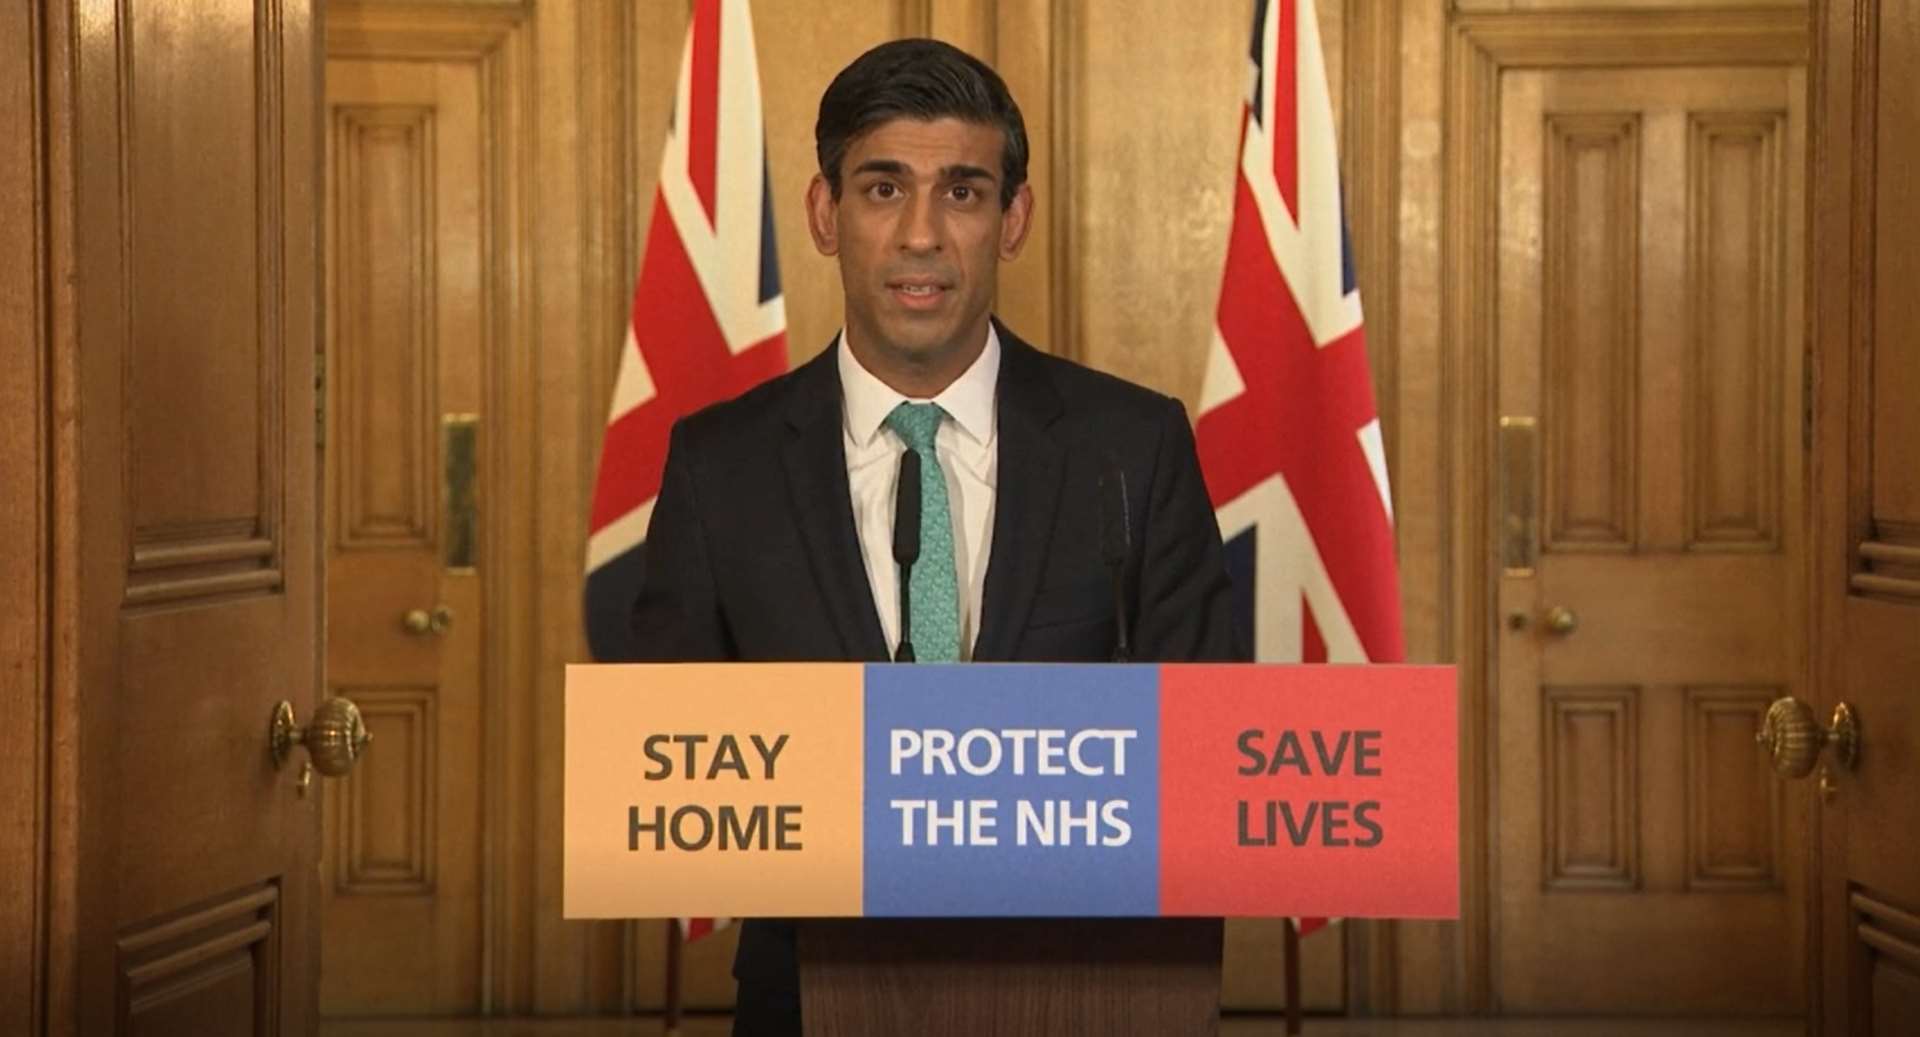 Chancellor Rishi Sunak speaks during a media briefing in Downing Street, London, on coronavirus (Covid-19) (PA Video/PA)